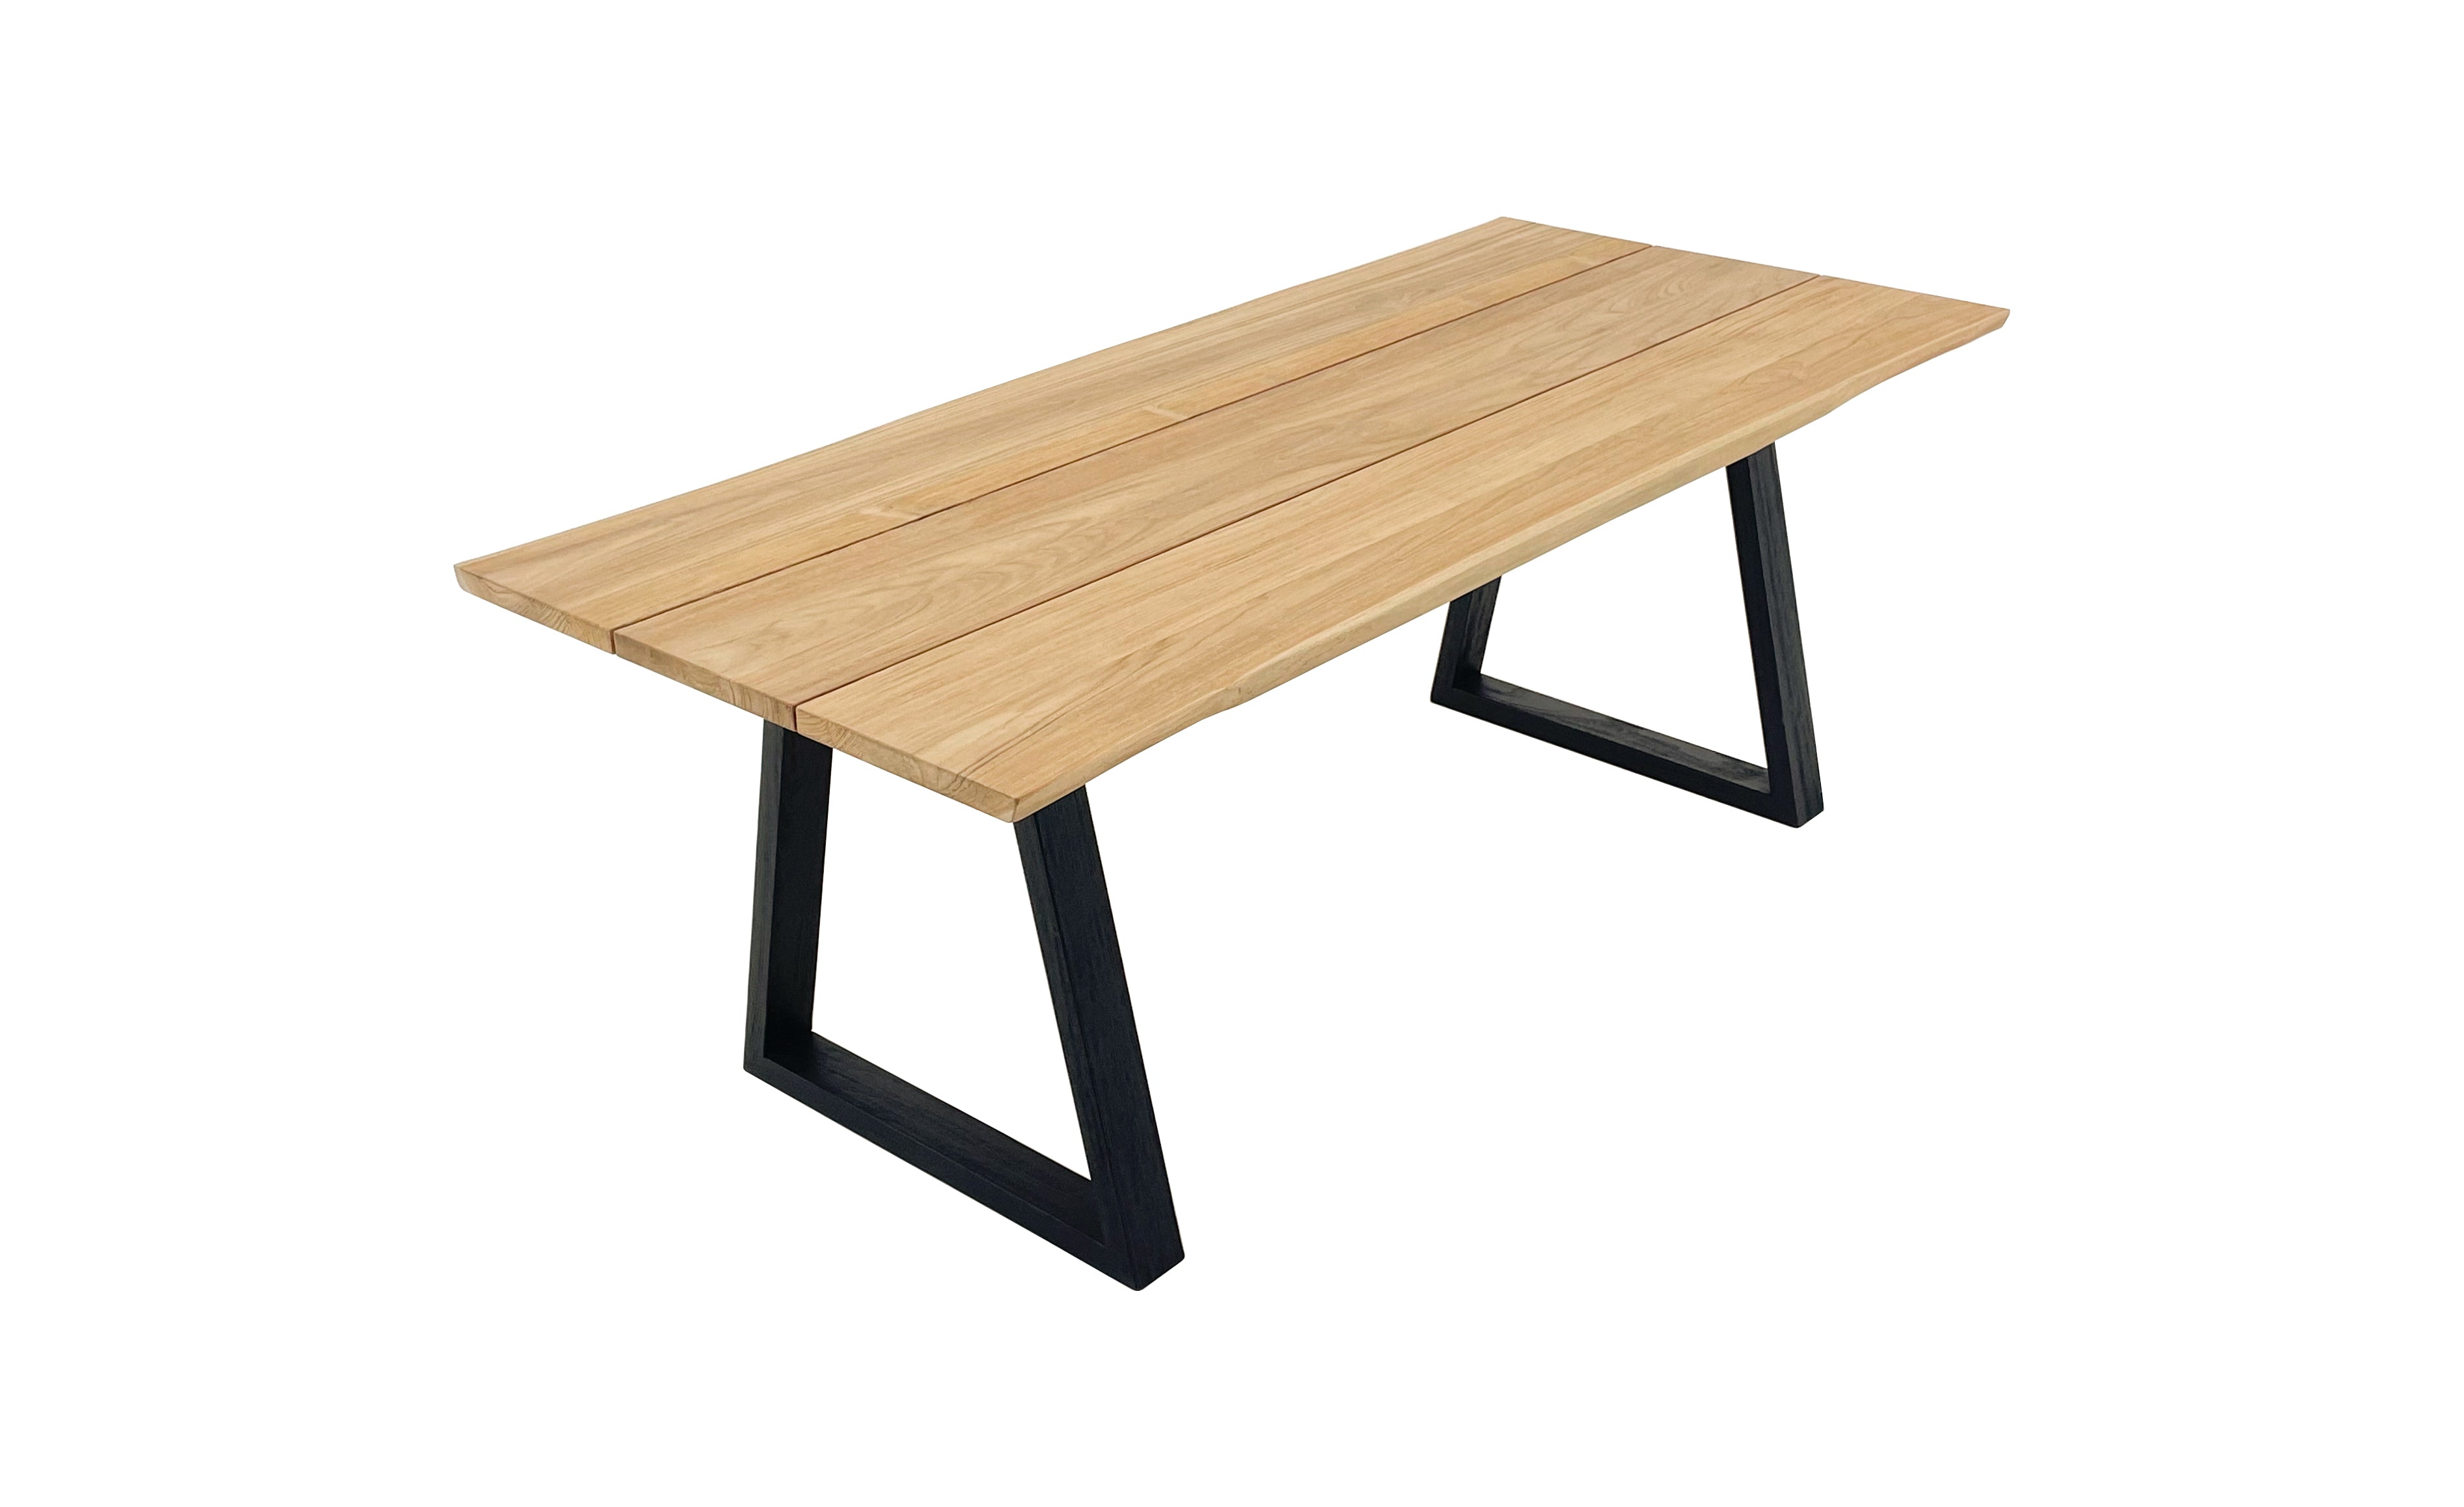 Ubud Natural Teak 4-6 Person Indoor or Outdoor Dining Table - 79"